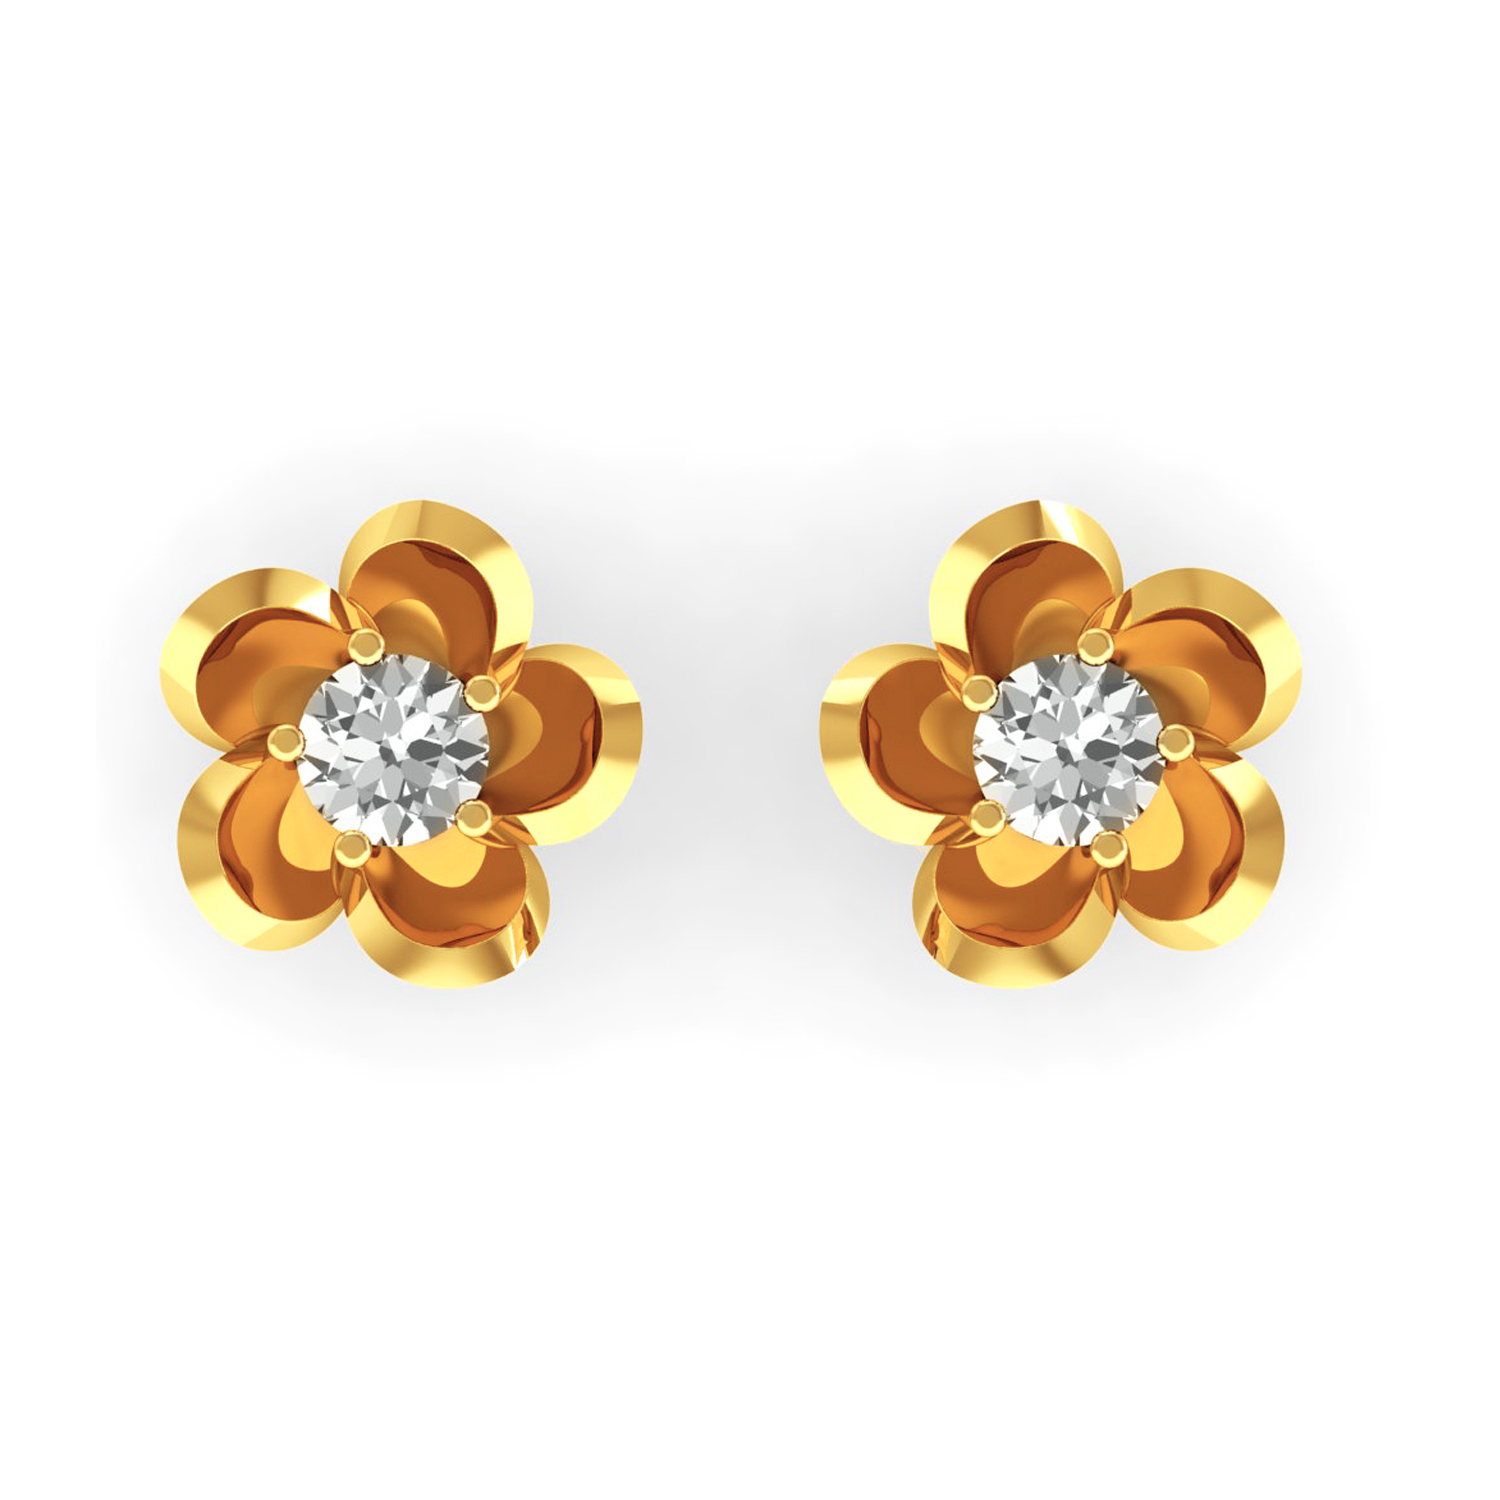 Solid Gold Floral Solitaire Stud Earrings Real Diamond Jewelry